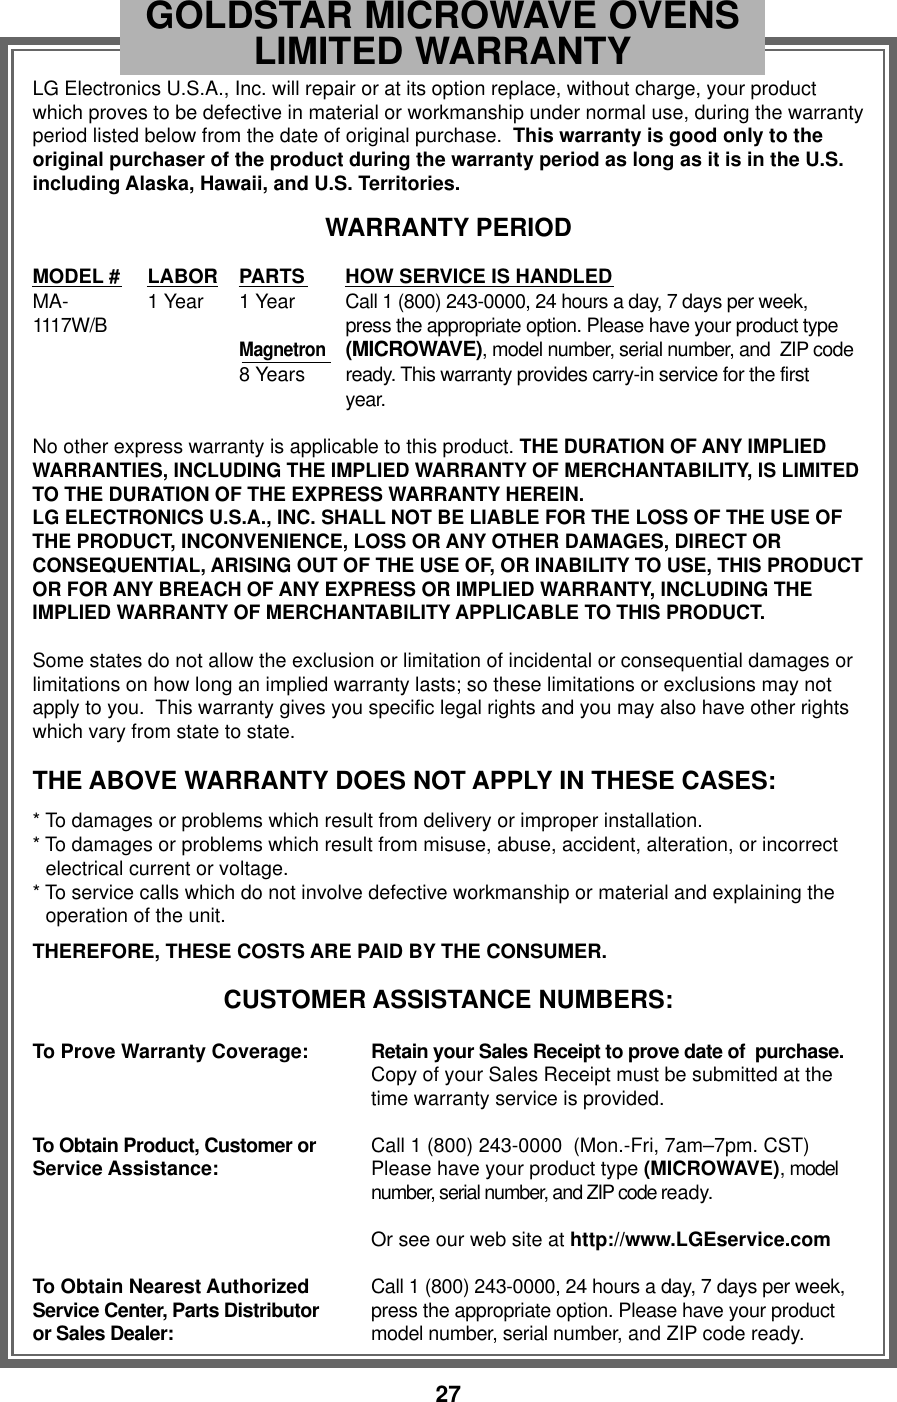 27LG Electronics U.S.A., Inc. will repair or at its option replace, without charge, your productwhich proves to be defective in material or workmanship under normal use, during the warrantyperiod listed below from the date of original purchase.  This warranty is good only to theoriginal purchaser of the product during the warranty period as long as it is in the U.S.including Alaska, Hawaii, and U.S. Territories.WARRANTY PERIODMODEL # LABOR PARTS HOW SERVICE IS HANDLEDMA- 1 Year 1 Year Call 1 (800) 243-0000, 24 hours a day, 7 days per week, 1117W/B press the appropriate option. Please have your product typeMagnetron(MICROWAVE), model number, serial number, and  ZIP code8 Years ready. This warranty provides carry-in service for the first year.No other express warranty is applicable to this product. THE DURATION OF ANY IMPLIEDWARRANTIES, INCLUDING THE IMPLIED WARRANTY OF MERCHANTABILITY, IS LIMITEDTO THE DURATION OF THE EXPRESS WARRANTY HEREIN.LG ELECTRONICS U.S.A., INC. SHALL NOT BE LIABLE FOR THE LOSS OF THE USE OFTHE PRODUCT, INCONVENIENCE, LOSS OR ANY OTHER DAMAGES, DIRECT ORCONSEQUENTIAL, ARISING OUT OF THE USE OF, OR INABILITY TO USE, THIS PRODUCTOR FOR ANY BREACH OF ANY EXPRESS OR IMPLIED WARRANTY, INCLUDING THEIMPLIED WARRANTY OF MERCHANTABILITY APPLICABLE TO THIS PRODUCT.Some states do not allow the exclusion or limitation of incidental or consequential damages orlimitations on how long an implied warranty lasts; so these limitations or exclusions may notapply to you.  This warranty gives you specific legal rights and you may also have other rightswhich vary from state to state.THE ABOVE WARRANTY DOES NOT APPLY IN THESE CASES:* To damages or problems which result from delivery or improper installation.* To damages or problems which result from misuse, abuse, accident, alteration, or incorrectelectrical current or voltage.* To service calls which do not involve defective workmanship or material and explaining theoperation of the unit.THEREFORE, THESE COSTS ARE PAID BY THE CONSUMER.CUSTOMER ASSISTANCE NUMBERS:To Prove Warranty Coverage: Retain your Sales Receipt to prove date of  purchase.Copy of your Sales Receipt must be submitted at thetime warranty service is provided.To Obtain Product, Customer or Call 1 (800) 243-0000  (Mon.-Fri, 7am–7pm. CST)Service Assistance: Please have your product type (MICROWAVE), modelnumber, serial number, and ZIP code ready.Or see our web site at http://www.LGEservice.comTo Obtain Nearest Authorized  Call 1 (800) 243-0000, 24 hours a day, 7 days per week,Service Center, Parts Distributor press the appropriate option. Please have your product or Sales Dealer: model number, serial number, and ZIP code ready.GOLDSTAR MICROWAVE OVENSLIMITED WARRANTY